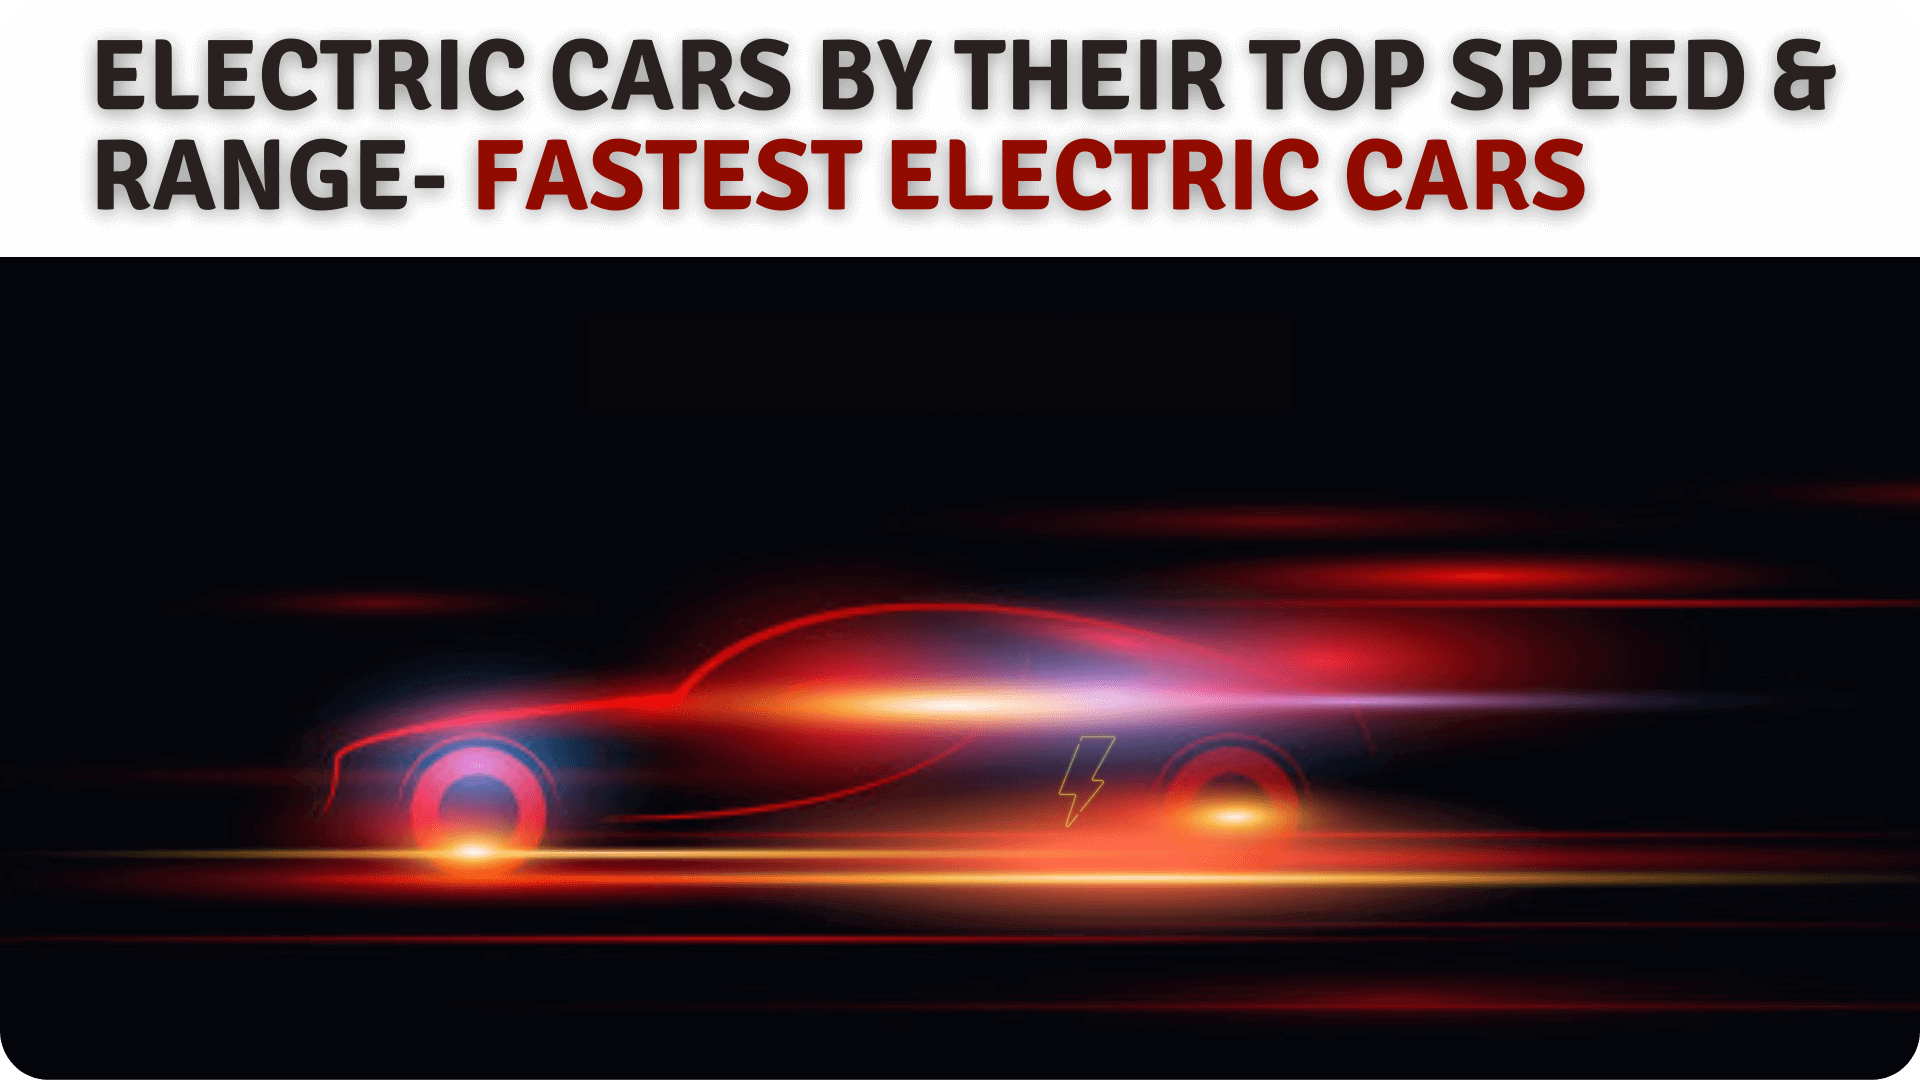 https://e-vehicleinfo.com/fastest-electric-cars-by-top-speed-range-india/